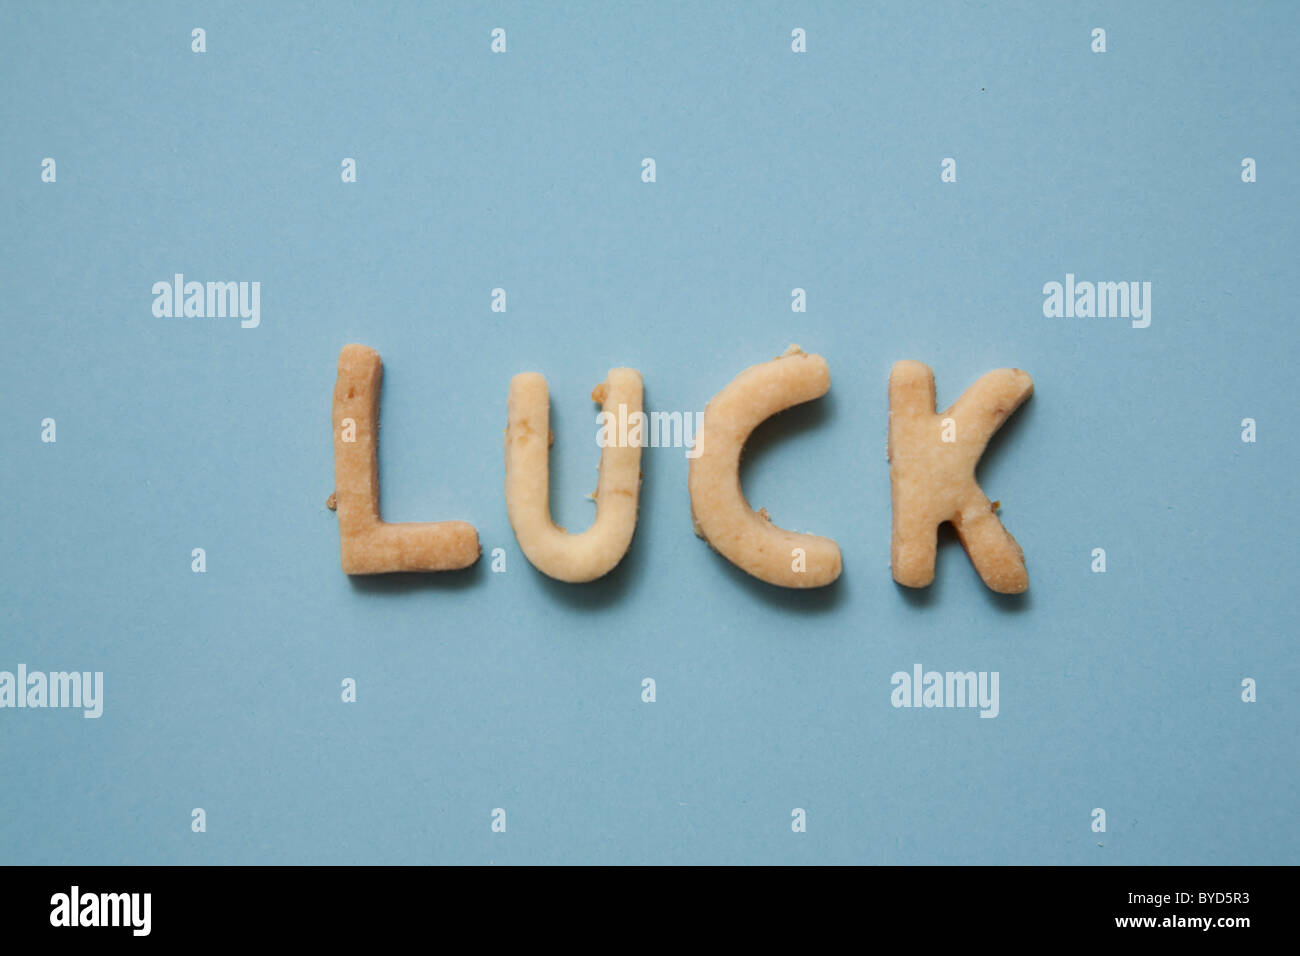 Luck, word written with biscuits Stock Photo